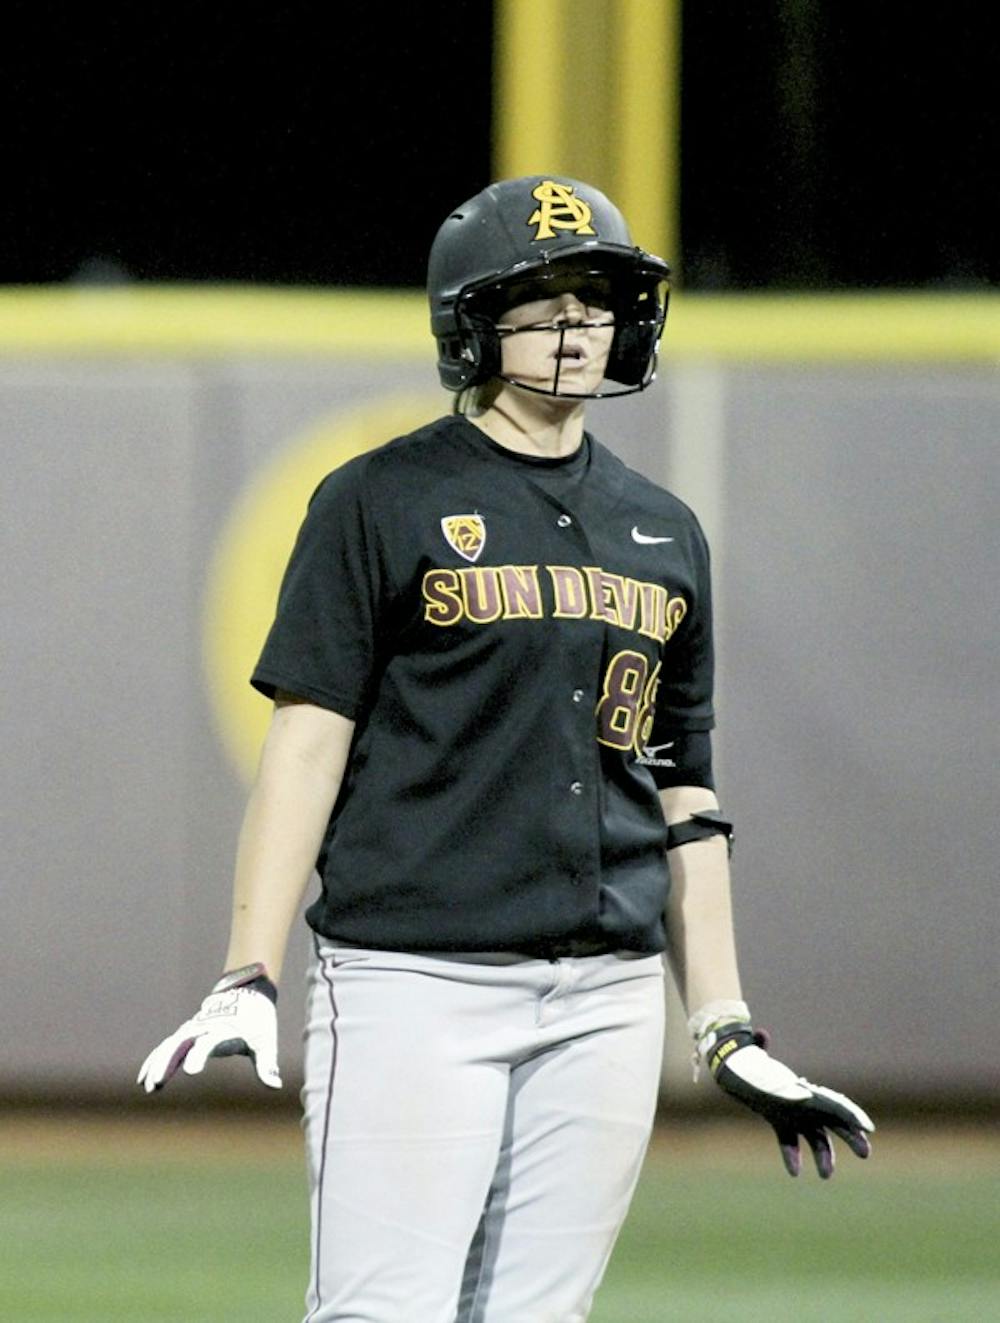 Annie Lockwood stands at second base in a game against UCLA on April 6. Lockwood and the Sun Devils have won eight of their last 10 games and are inching closer to No. 1 California in the Pac-12 standings. (Photo by Sam Rosenbaum)